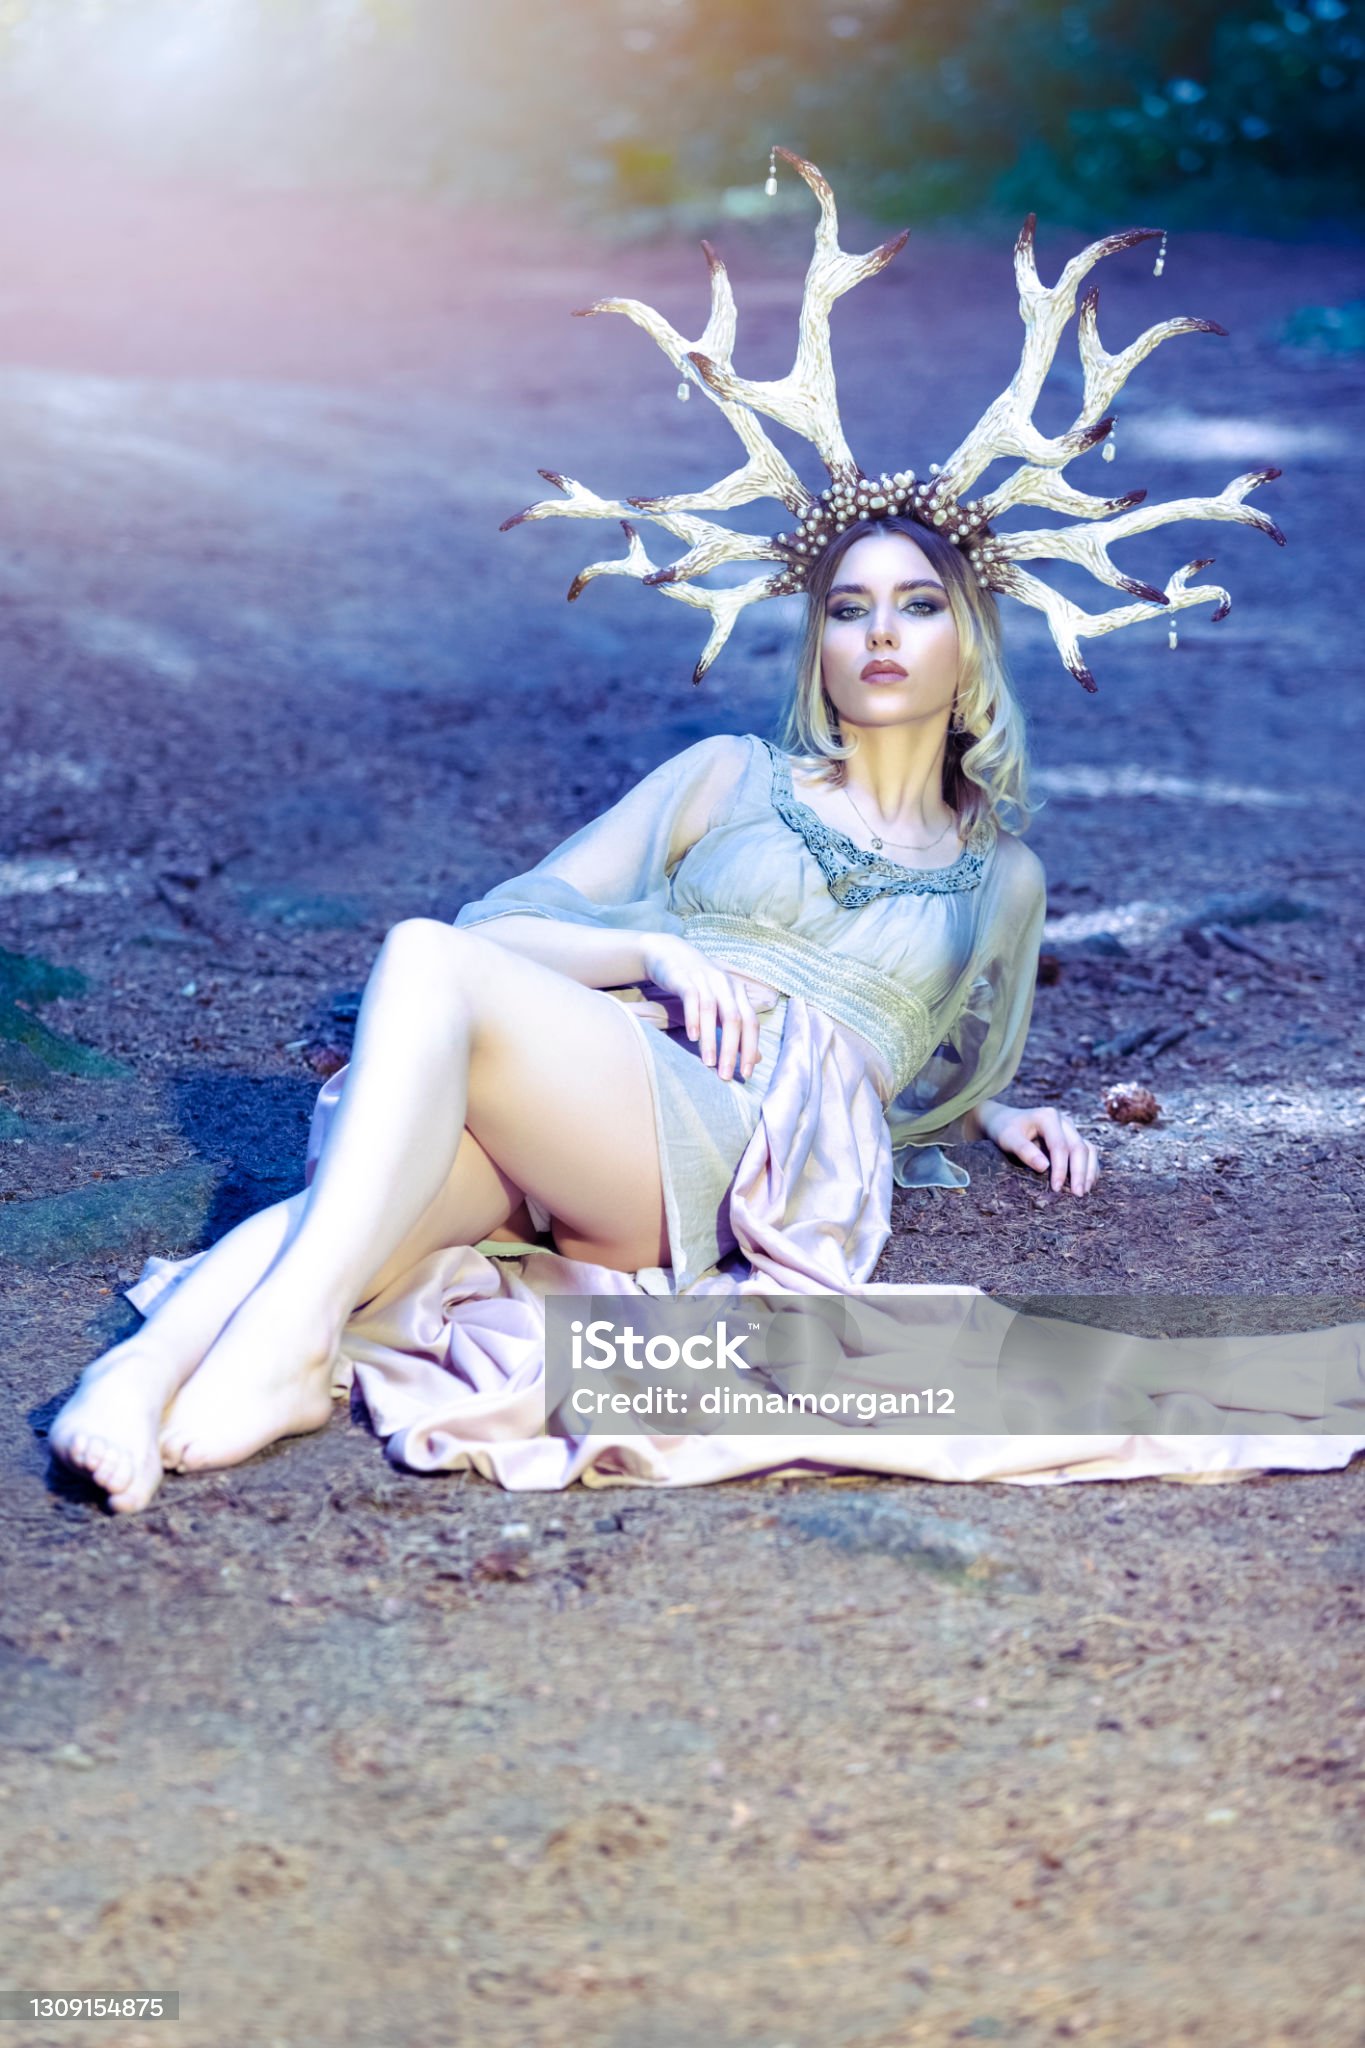 https://media.istockphoto.com/id/1309154875/photo/portrait-of-beautiful-girl-posing-with-artistic-deer-horns-in-summer-forest-on-sandy-forest.jpg?s=2048x2048&amp;w=is&amp;k=20&amp;c=SGkTl4nkUATwGv4xKm7WAt3I765fUEAPCMFpxd_XFwI=